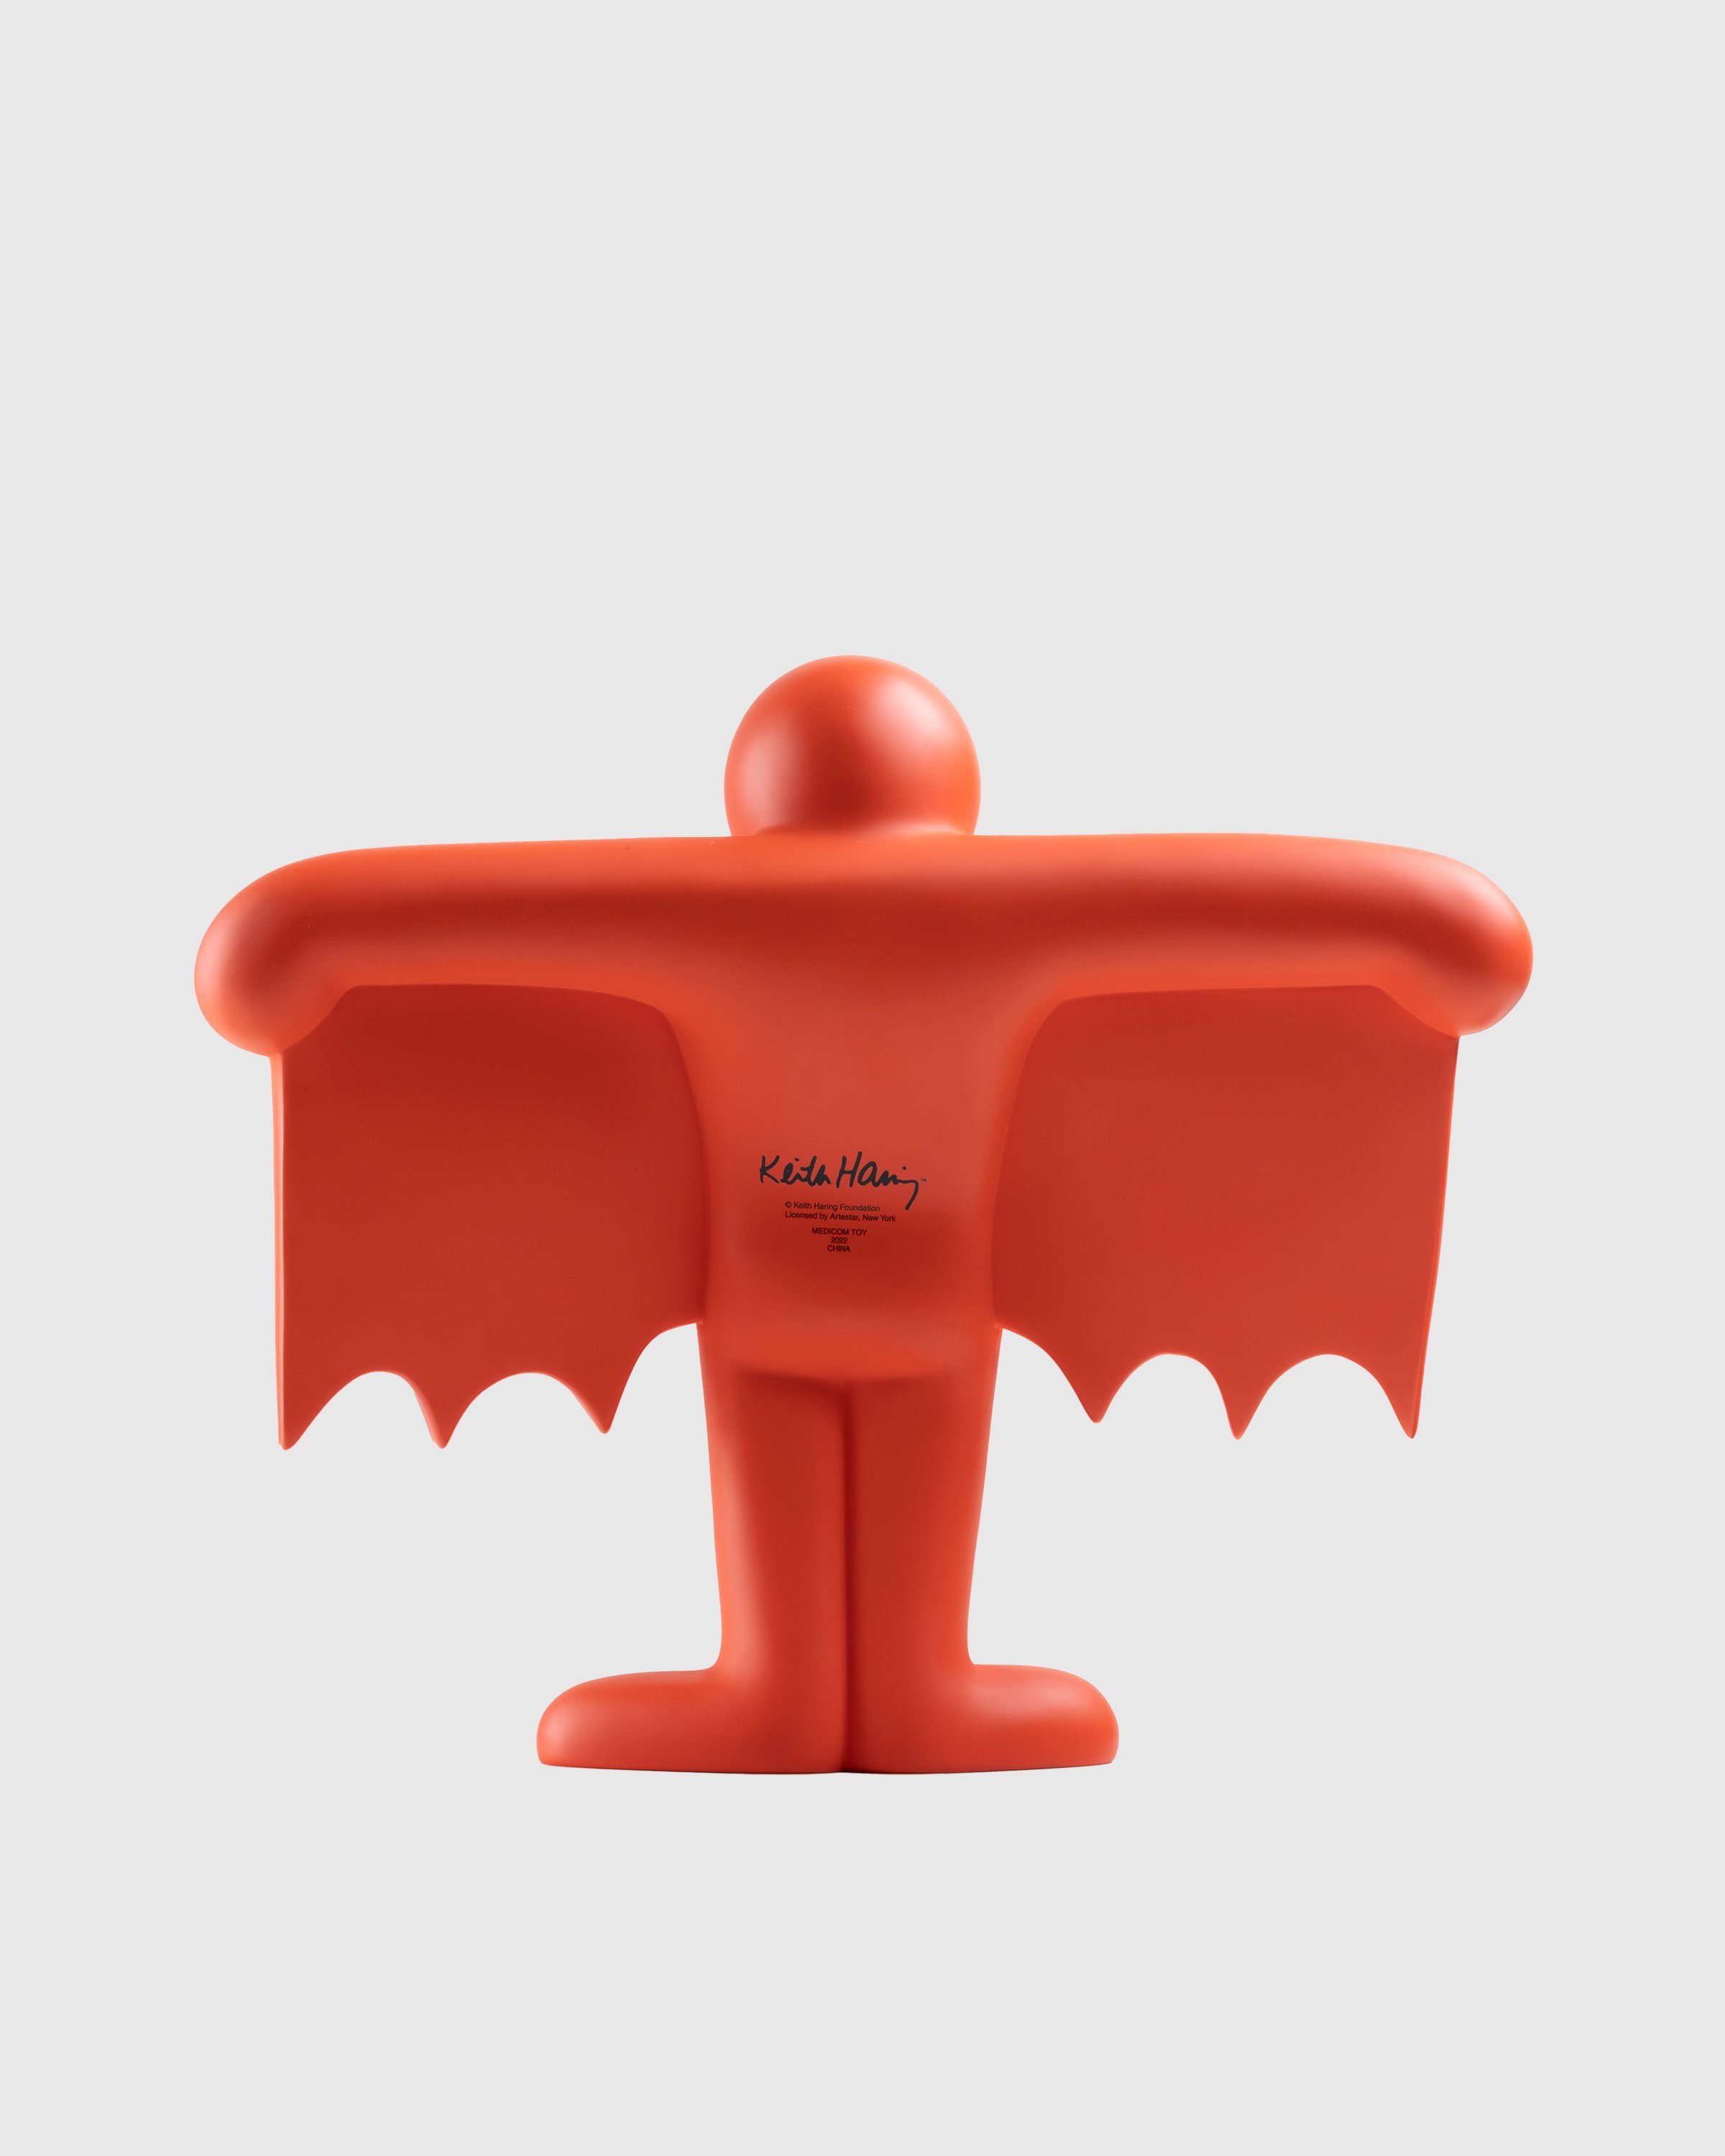 Medicom - Keith Haring Flying Devil Statue Red - Lifestyle - Red - Image 2